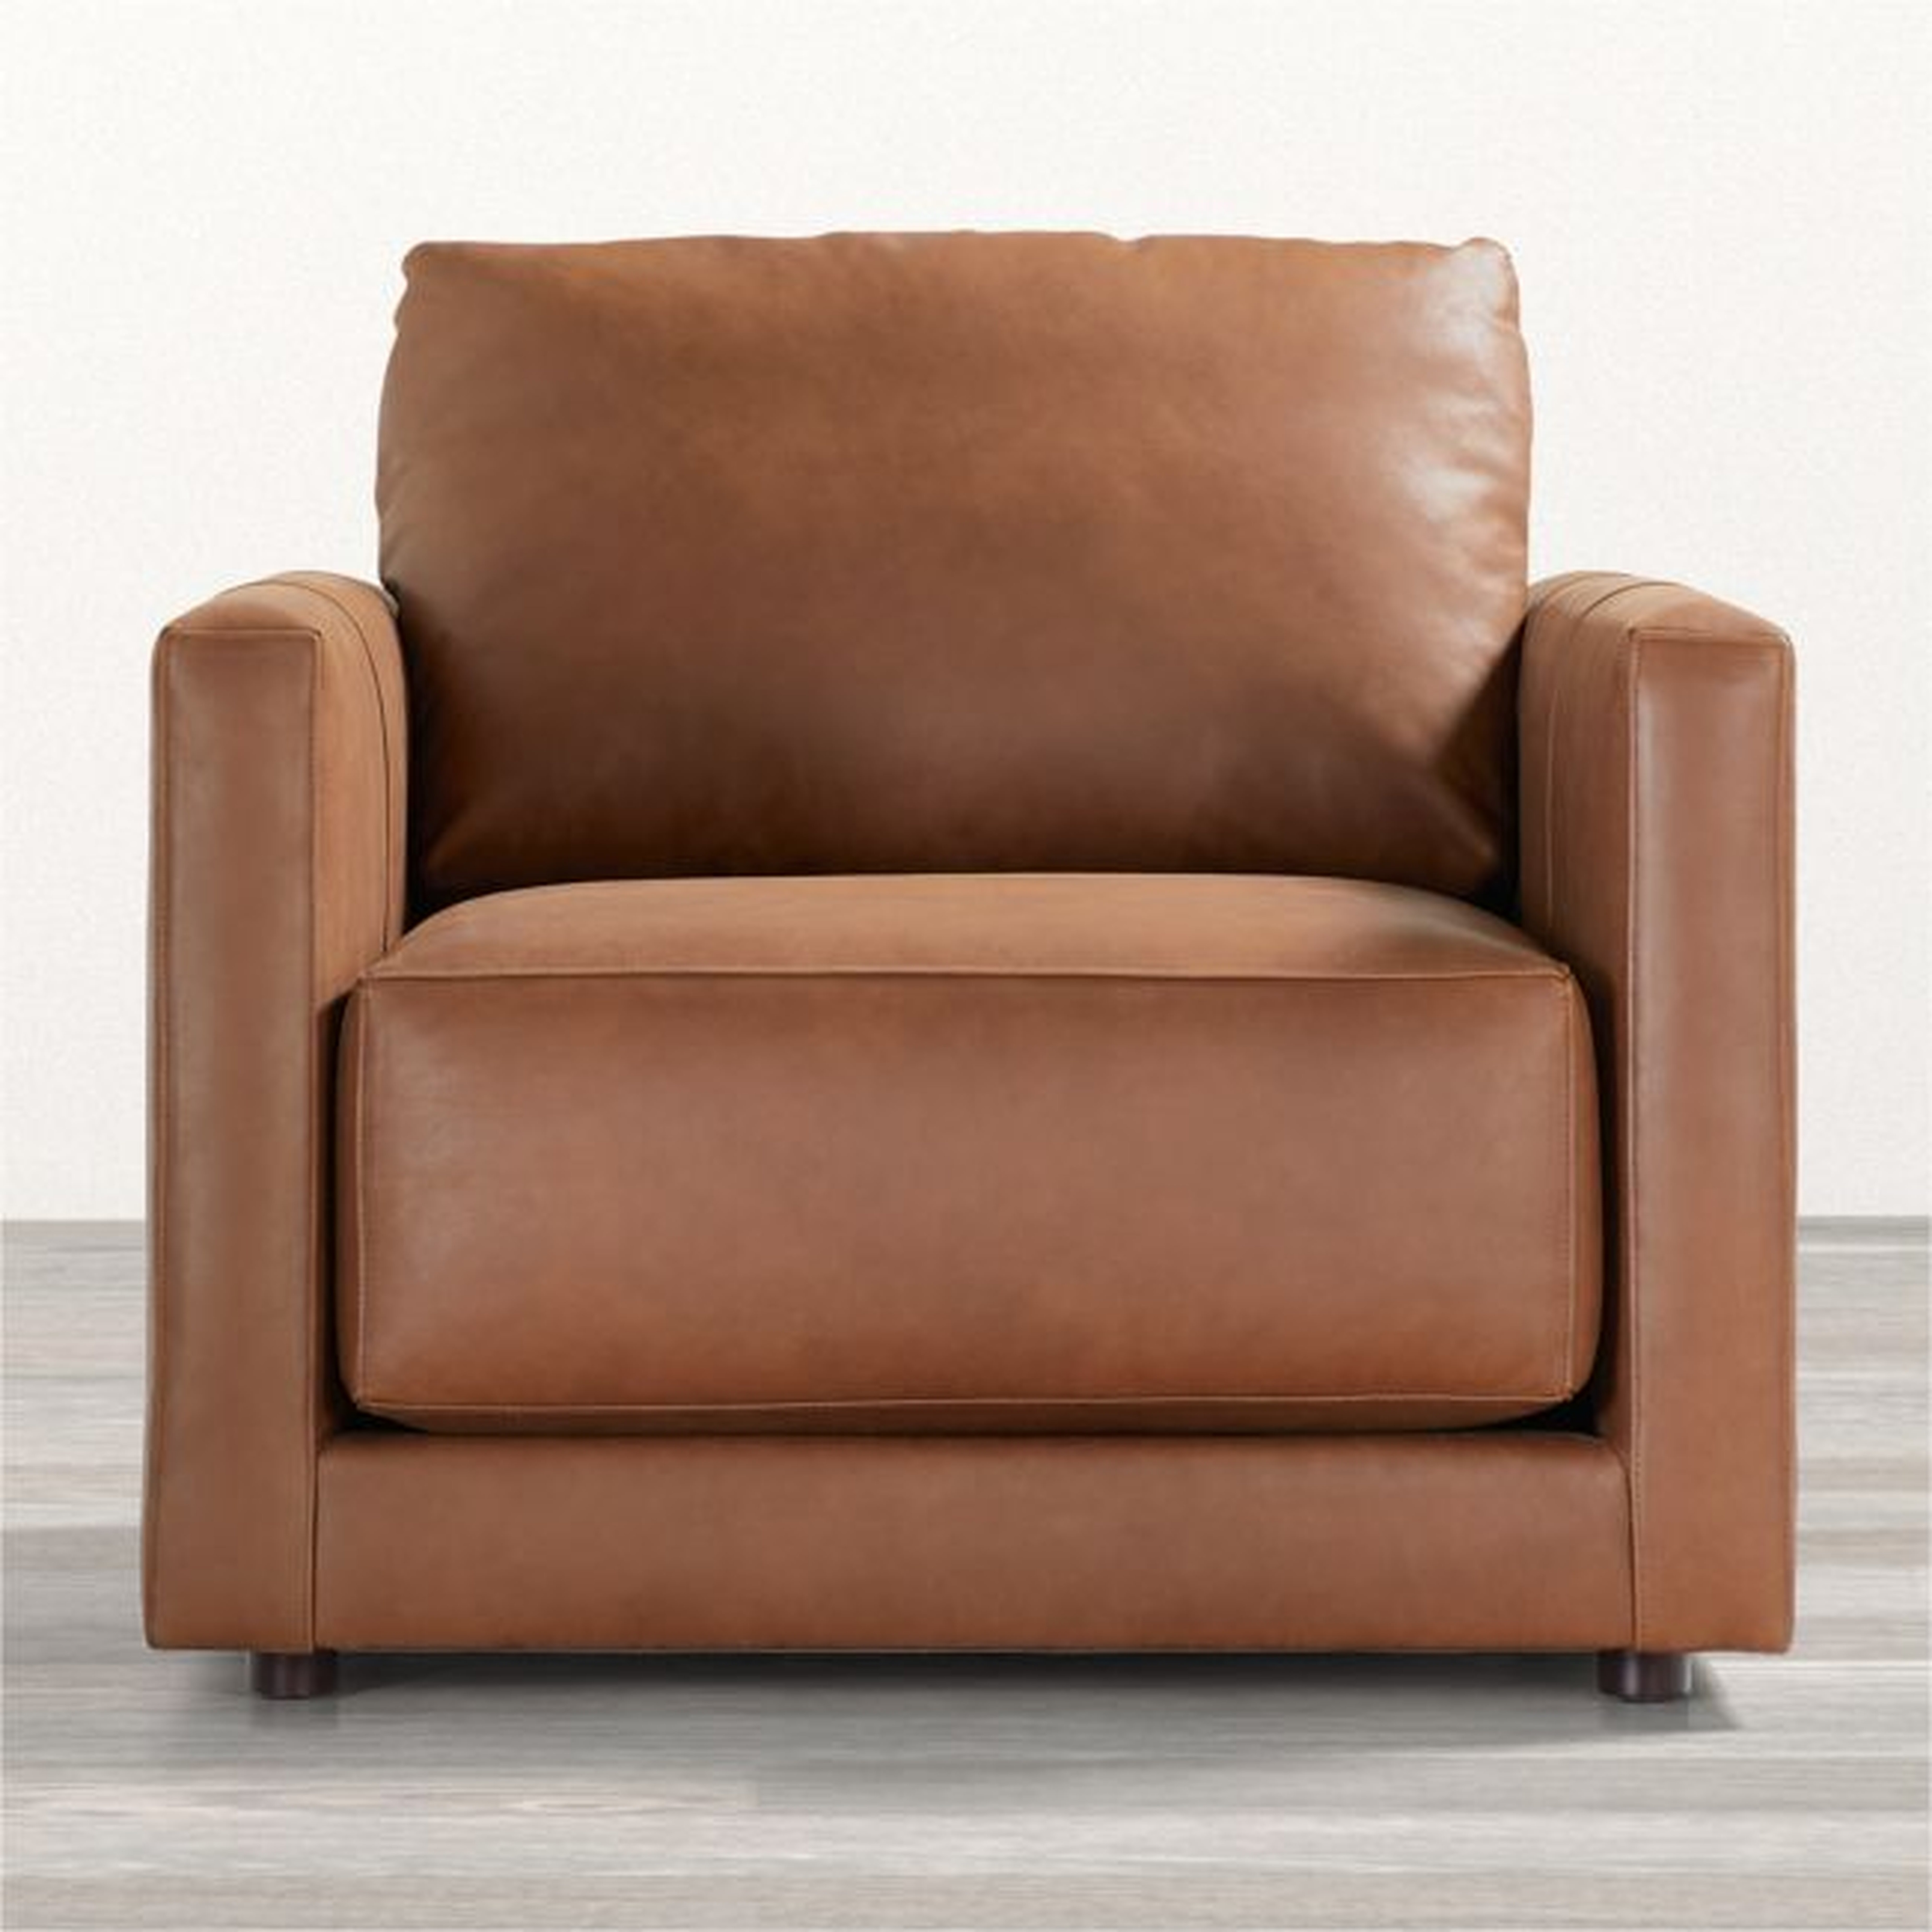 Gather Deep Leather Chair - Crate and Barrel